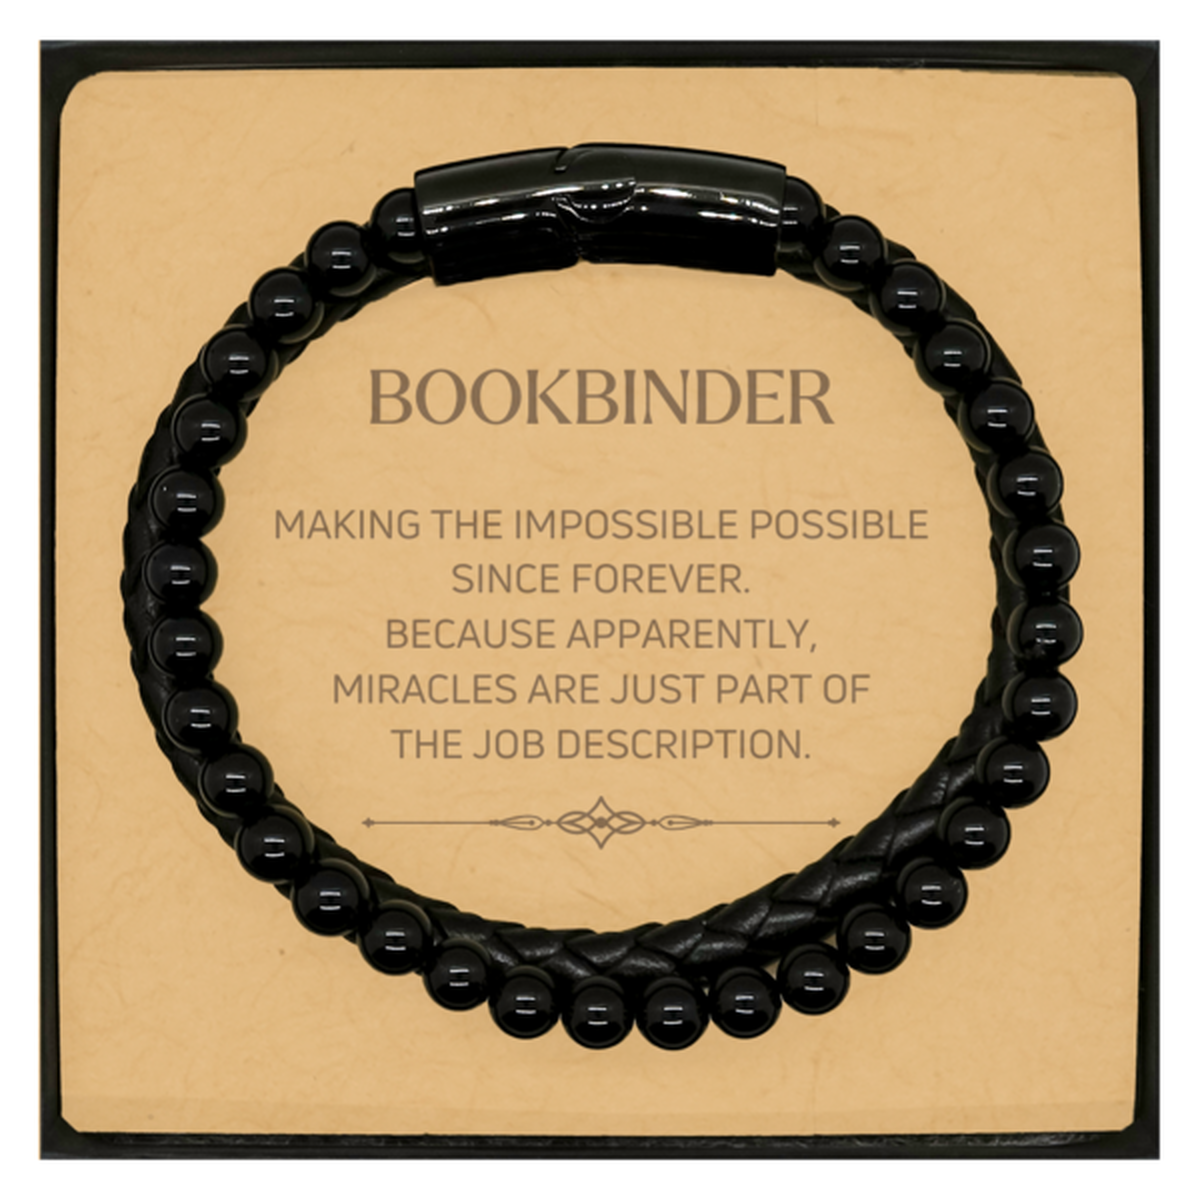 Funny Bookbinder Gifts, Miracles are just part of the job description, Inspirational Birthday Christmas Stone Leather Bracelets For Bookbinder, Men, Women, Coworkers, Friends, Boss